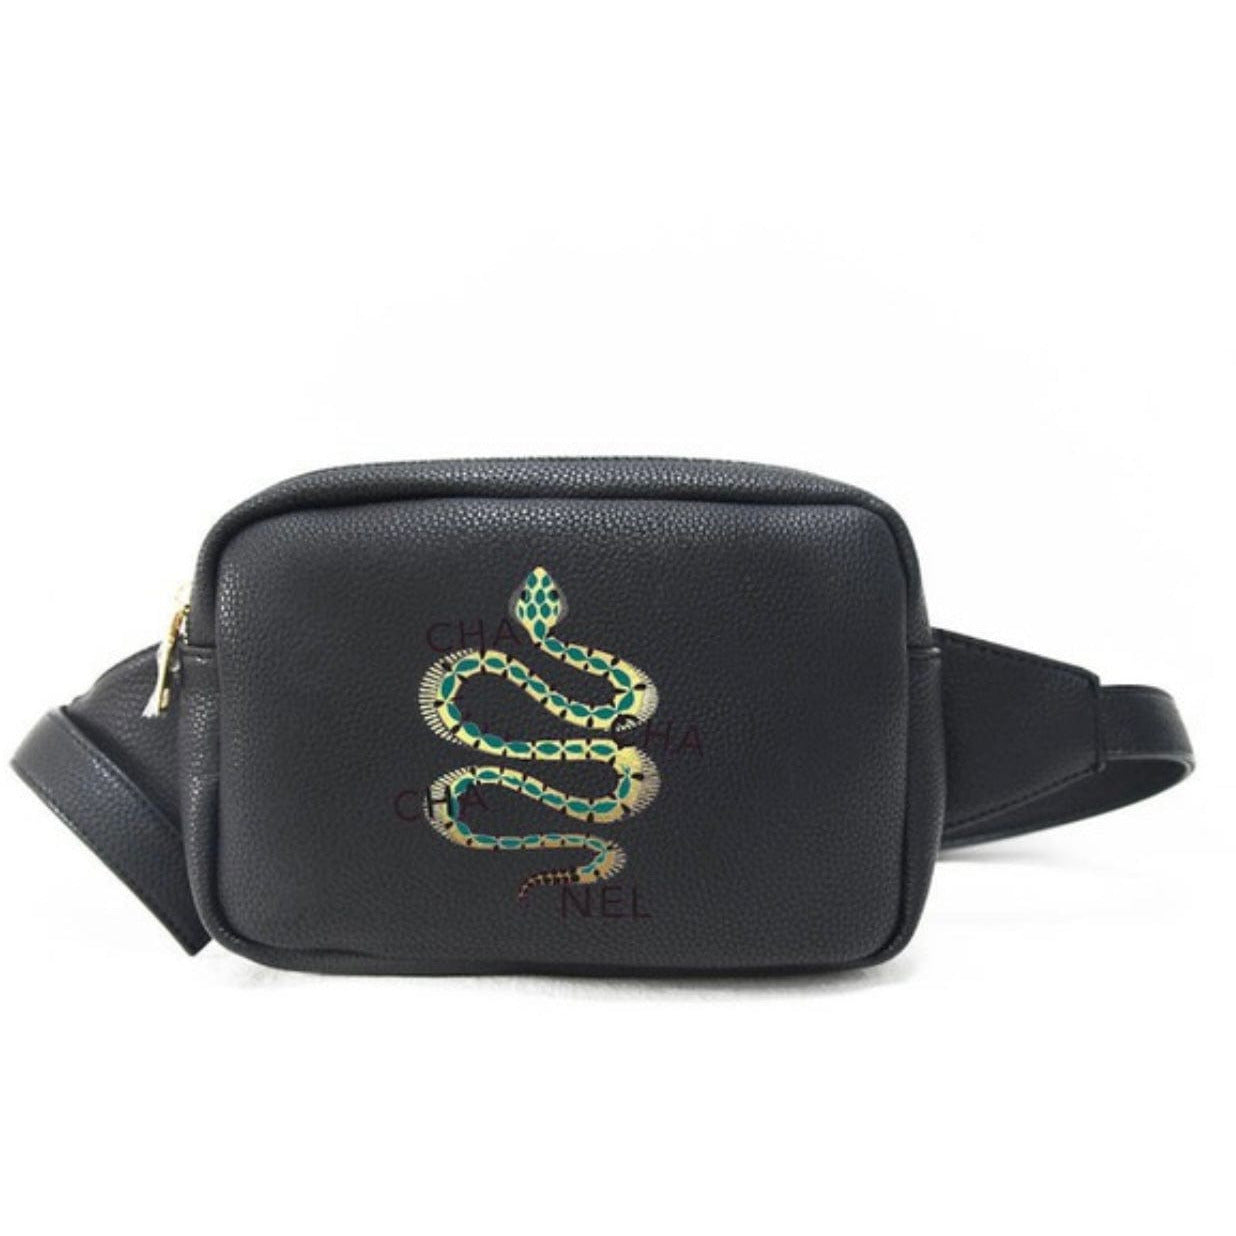 Fanny Pack Black ChaCha Fanny Pack